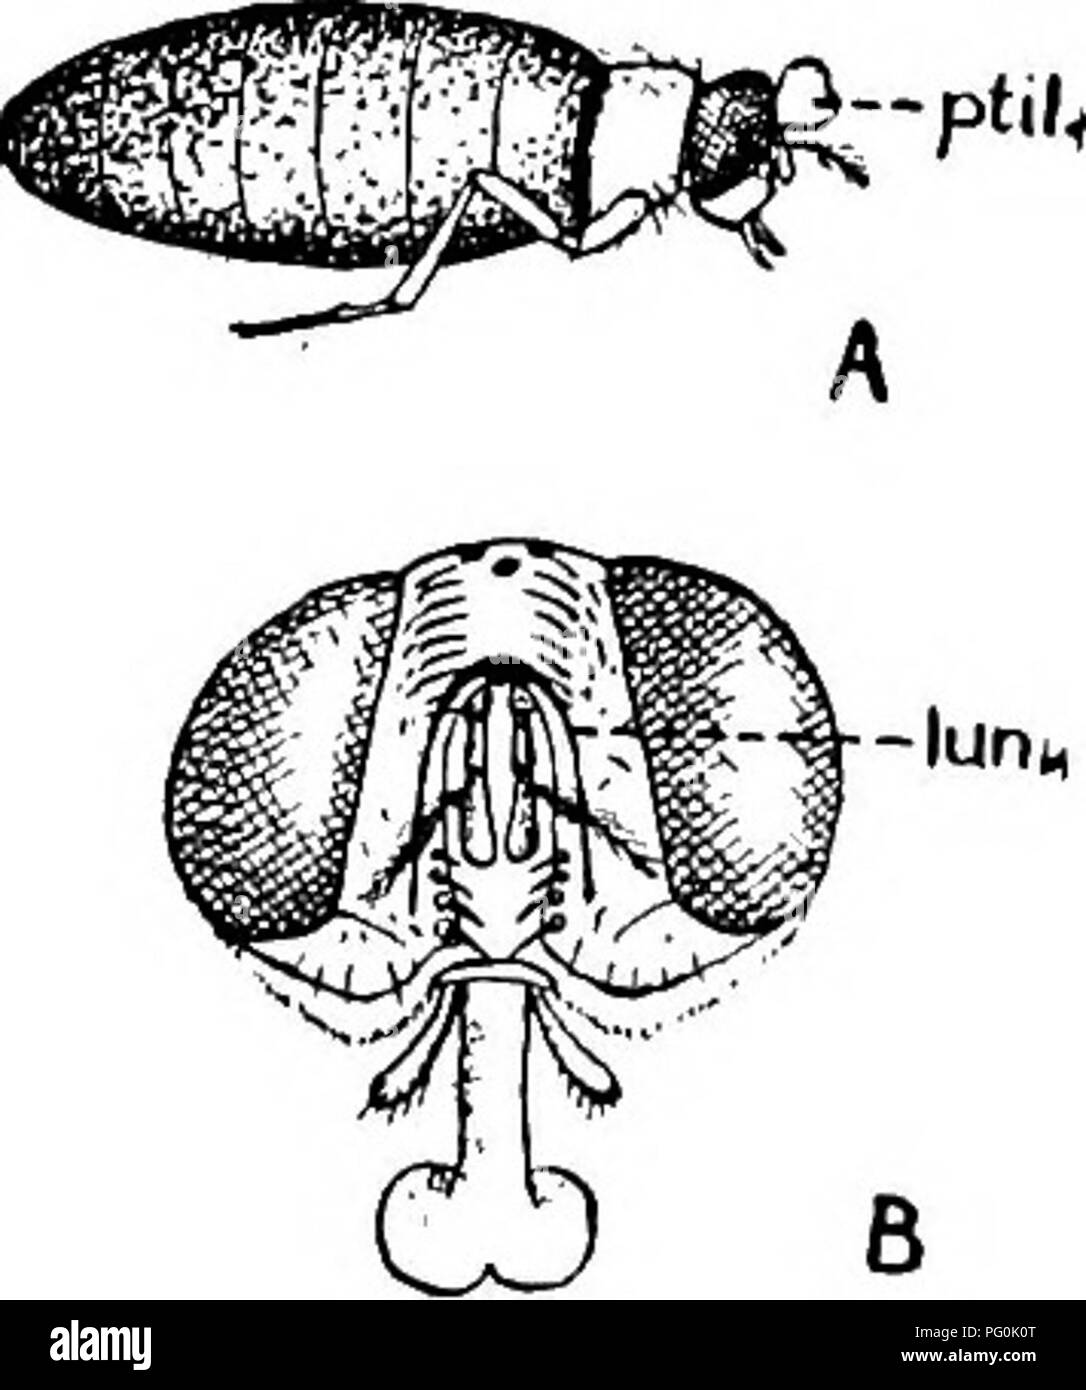 . Animal parasites and human disease. Medical parasitology; Insects as carriers of disease. Fig. 209. Types of pupal cases, showing manner 6f emer- gence of adults. A, empty case of blowfly, typical co-arctate pupa of Cyclorrhapha; B, empty case of mosquito, typical ob- tected pupa of Orthorrhapha. Fig. 210. A, &amp;y emerg- ing from pupal case, show- ing bladder-like ptilinium (ptil.) by means of which the end of the case is pushed off; B, face of fly showing scar or lunule (lun.) left by drying up of ptilinium. (After Alcock.) cuticle, and is often capable of considerable activity; from this Stock Photo